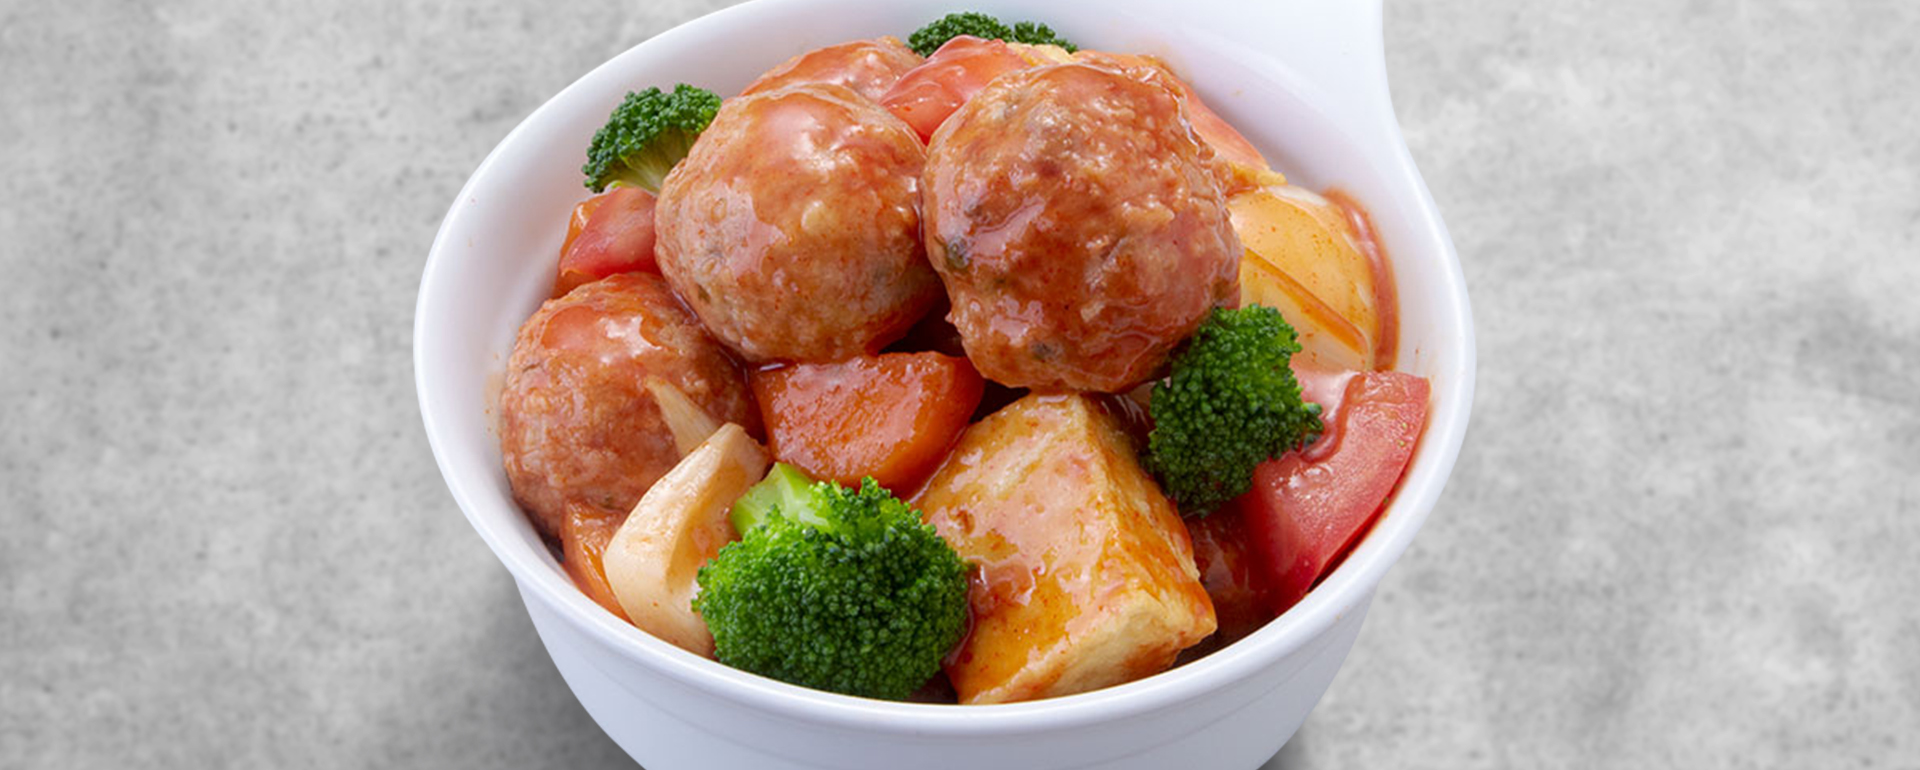 Hot And Spicy Meat Balls Casserole